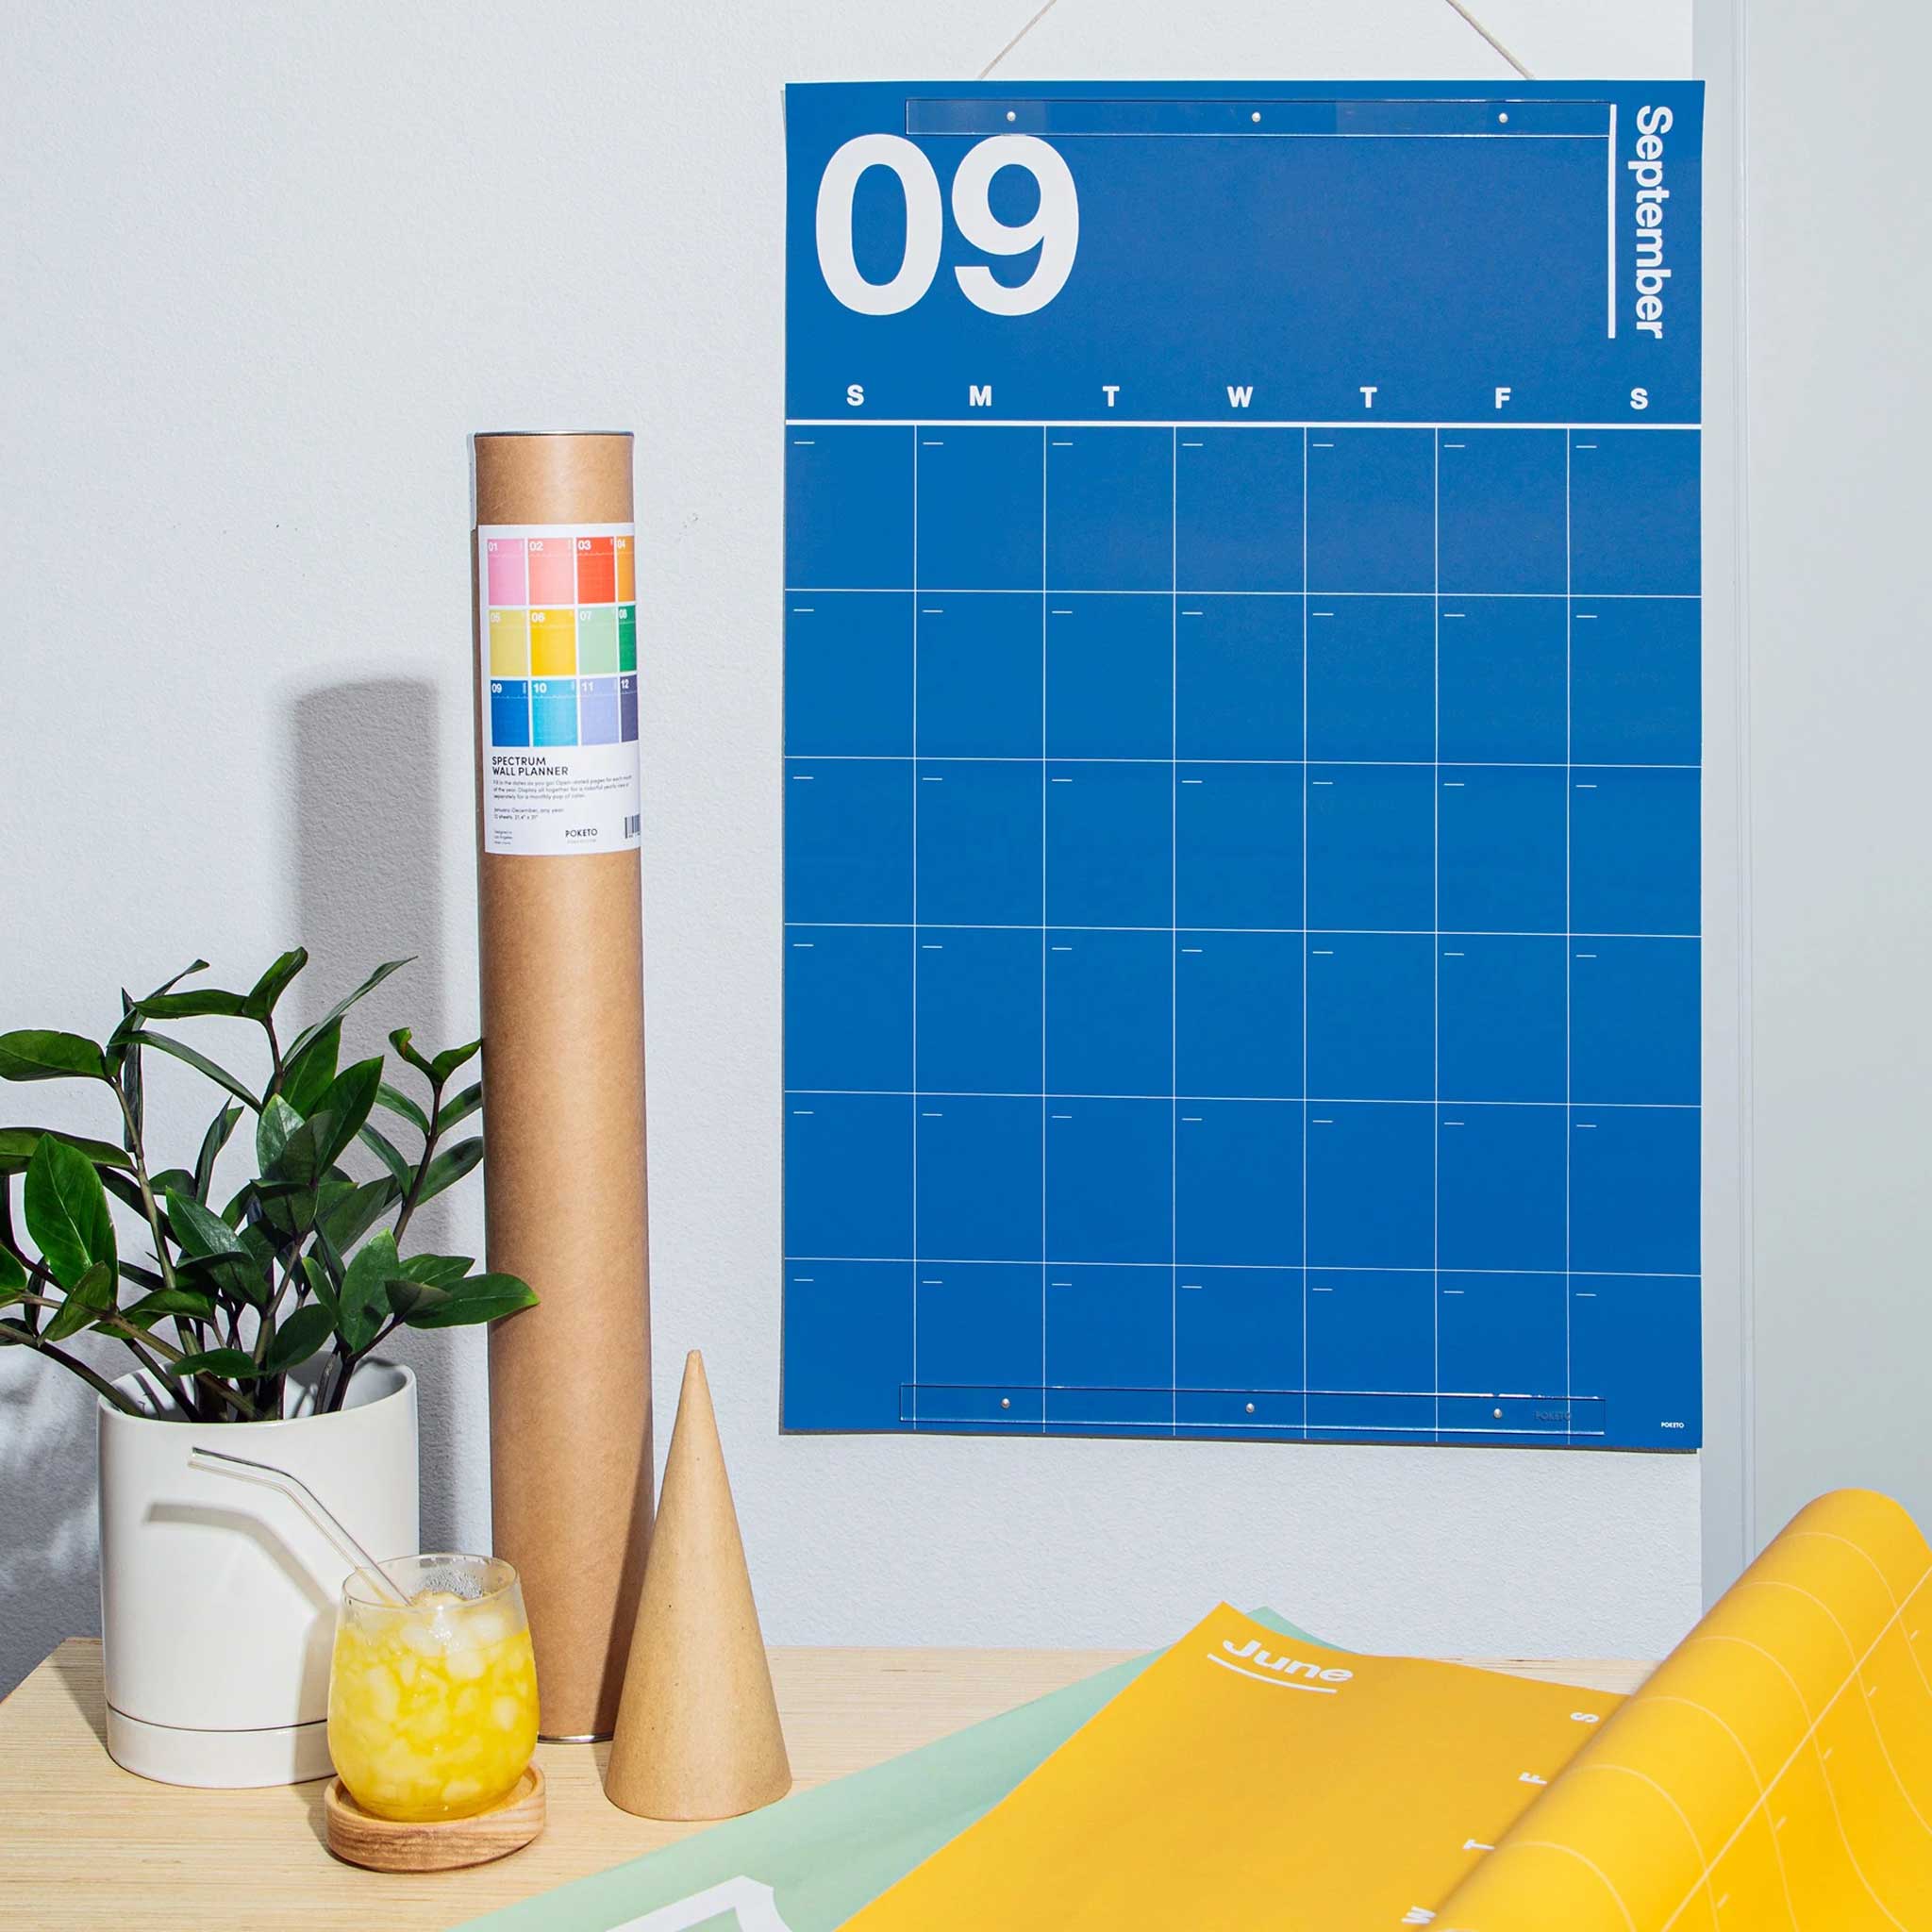 SPECTRUM | Colorful & open-dated WALL PLANNER | 77x52 cm | Poketo